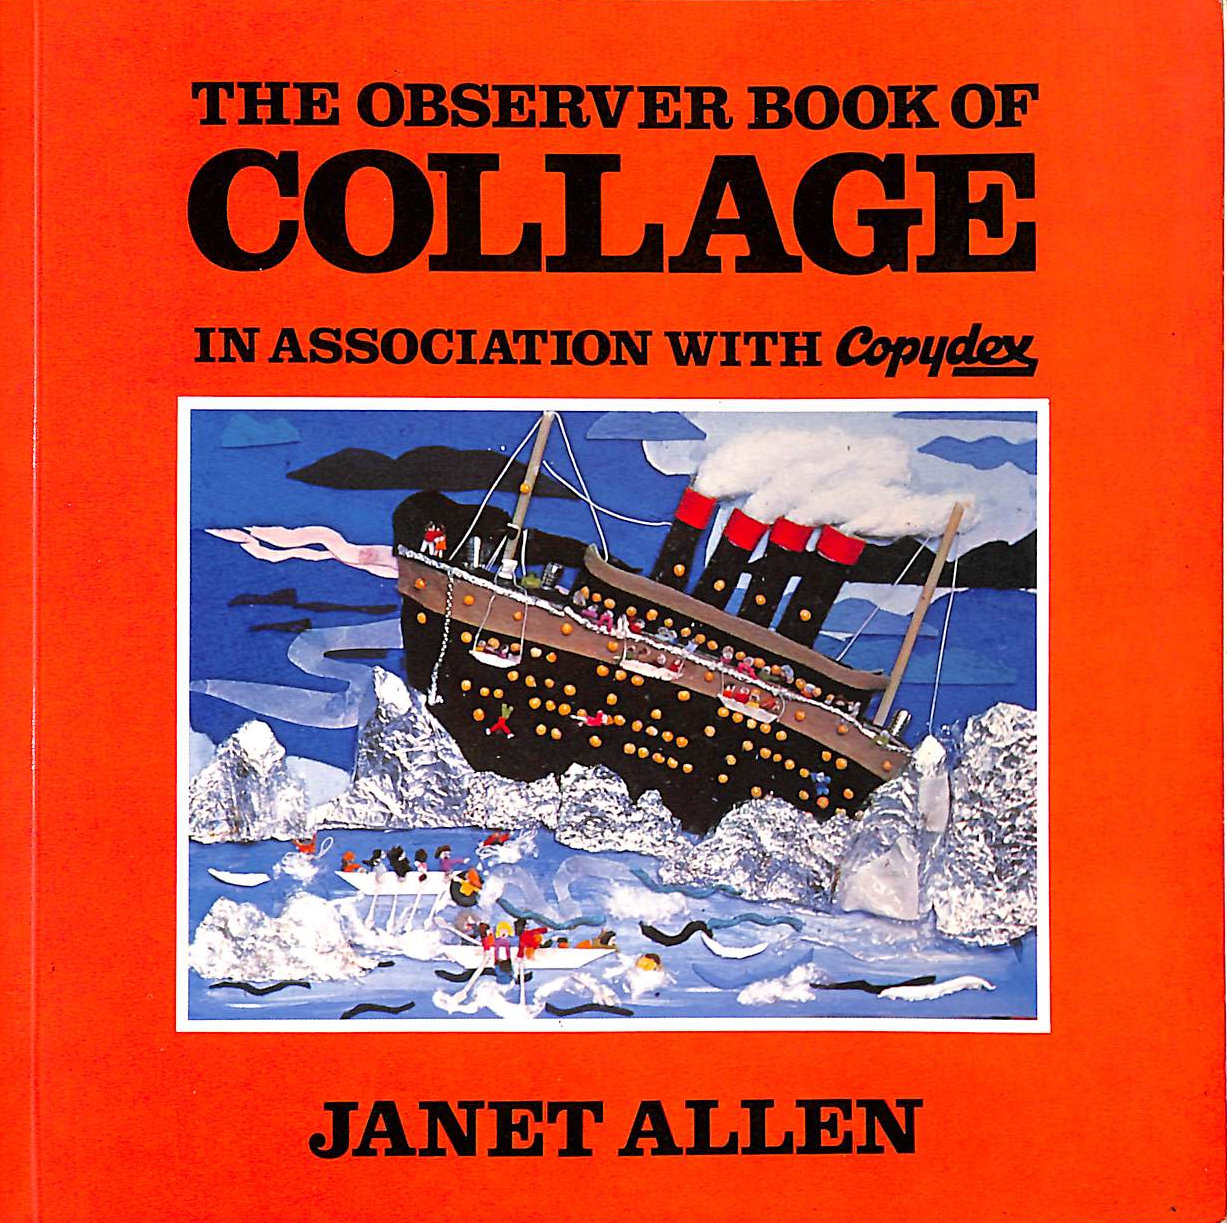 ALLEN, JANET - The Observer Book of Collage